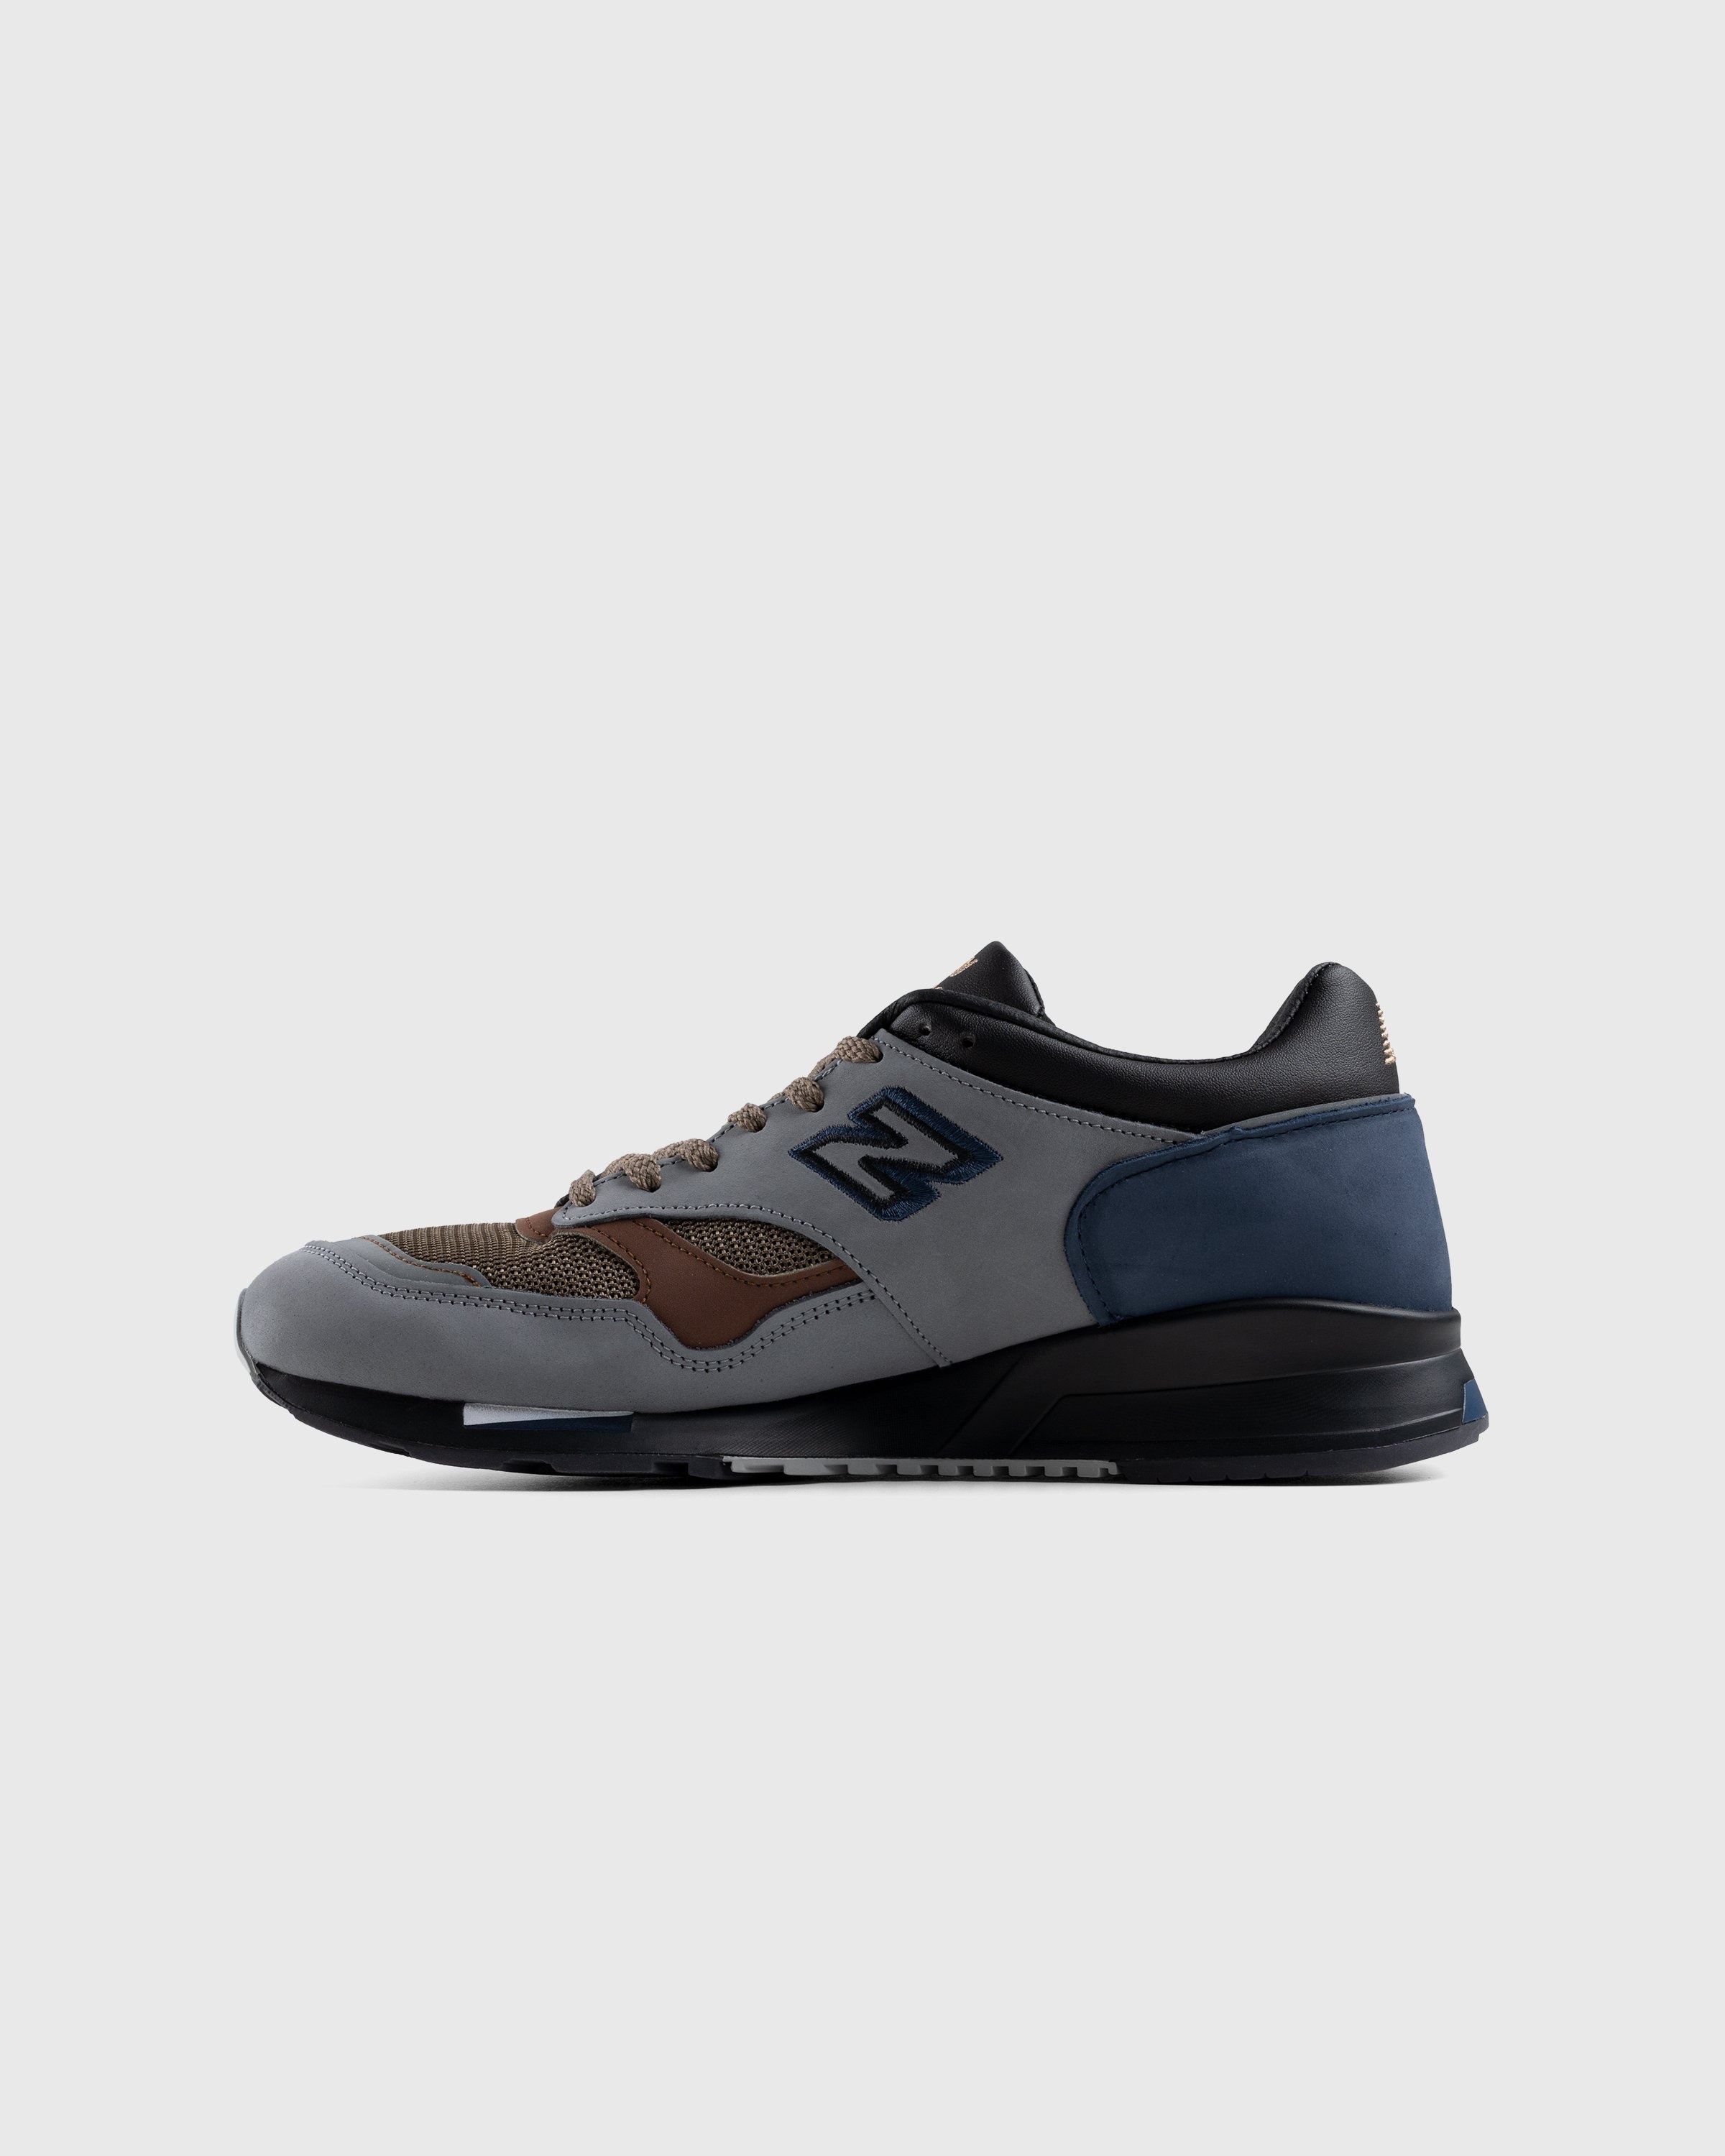 New Balance – M1500INV Grey/Black - Low Top Sneakers - Grey - Image 2